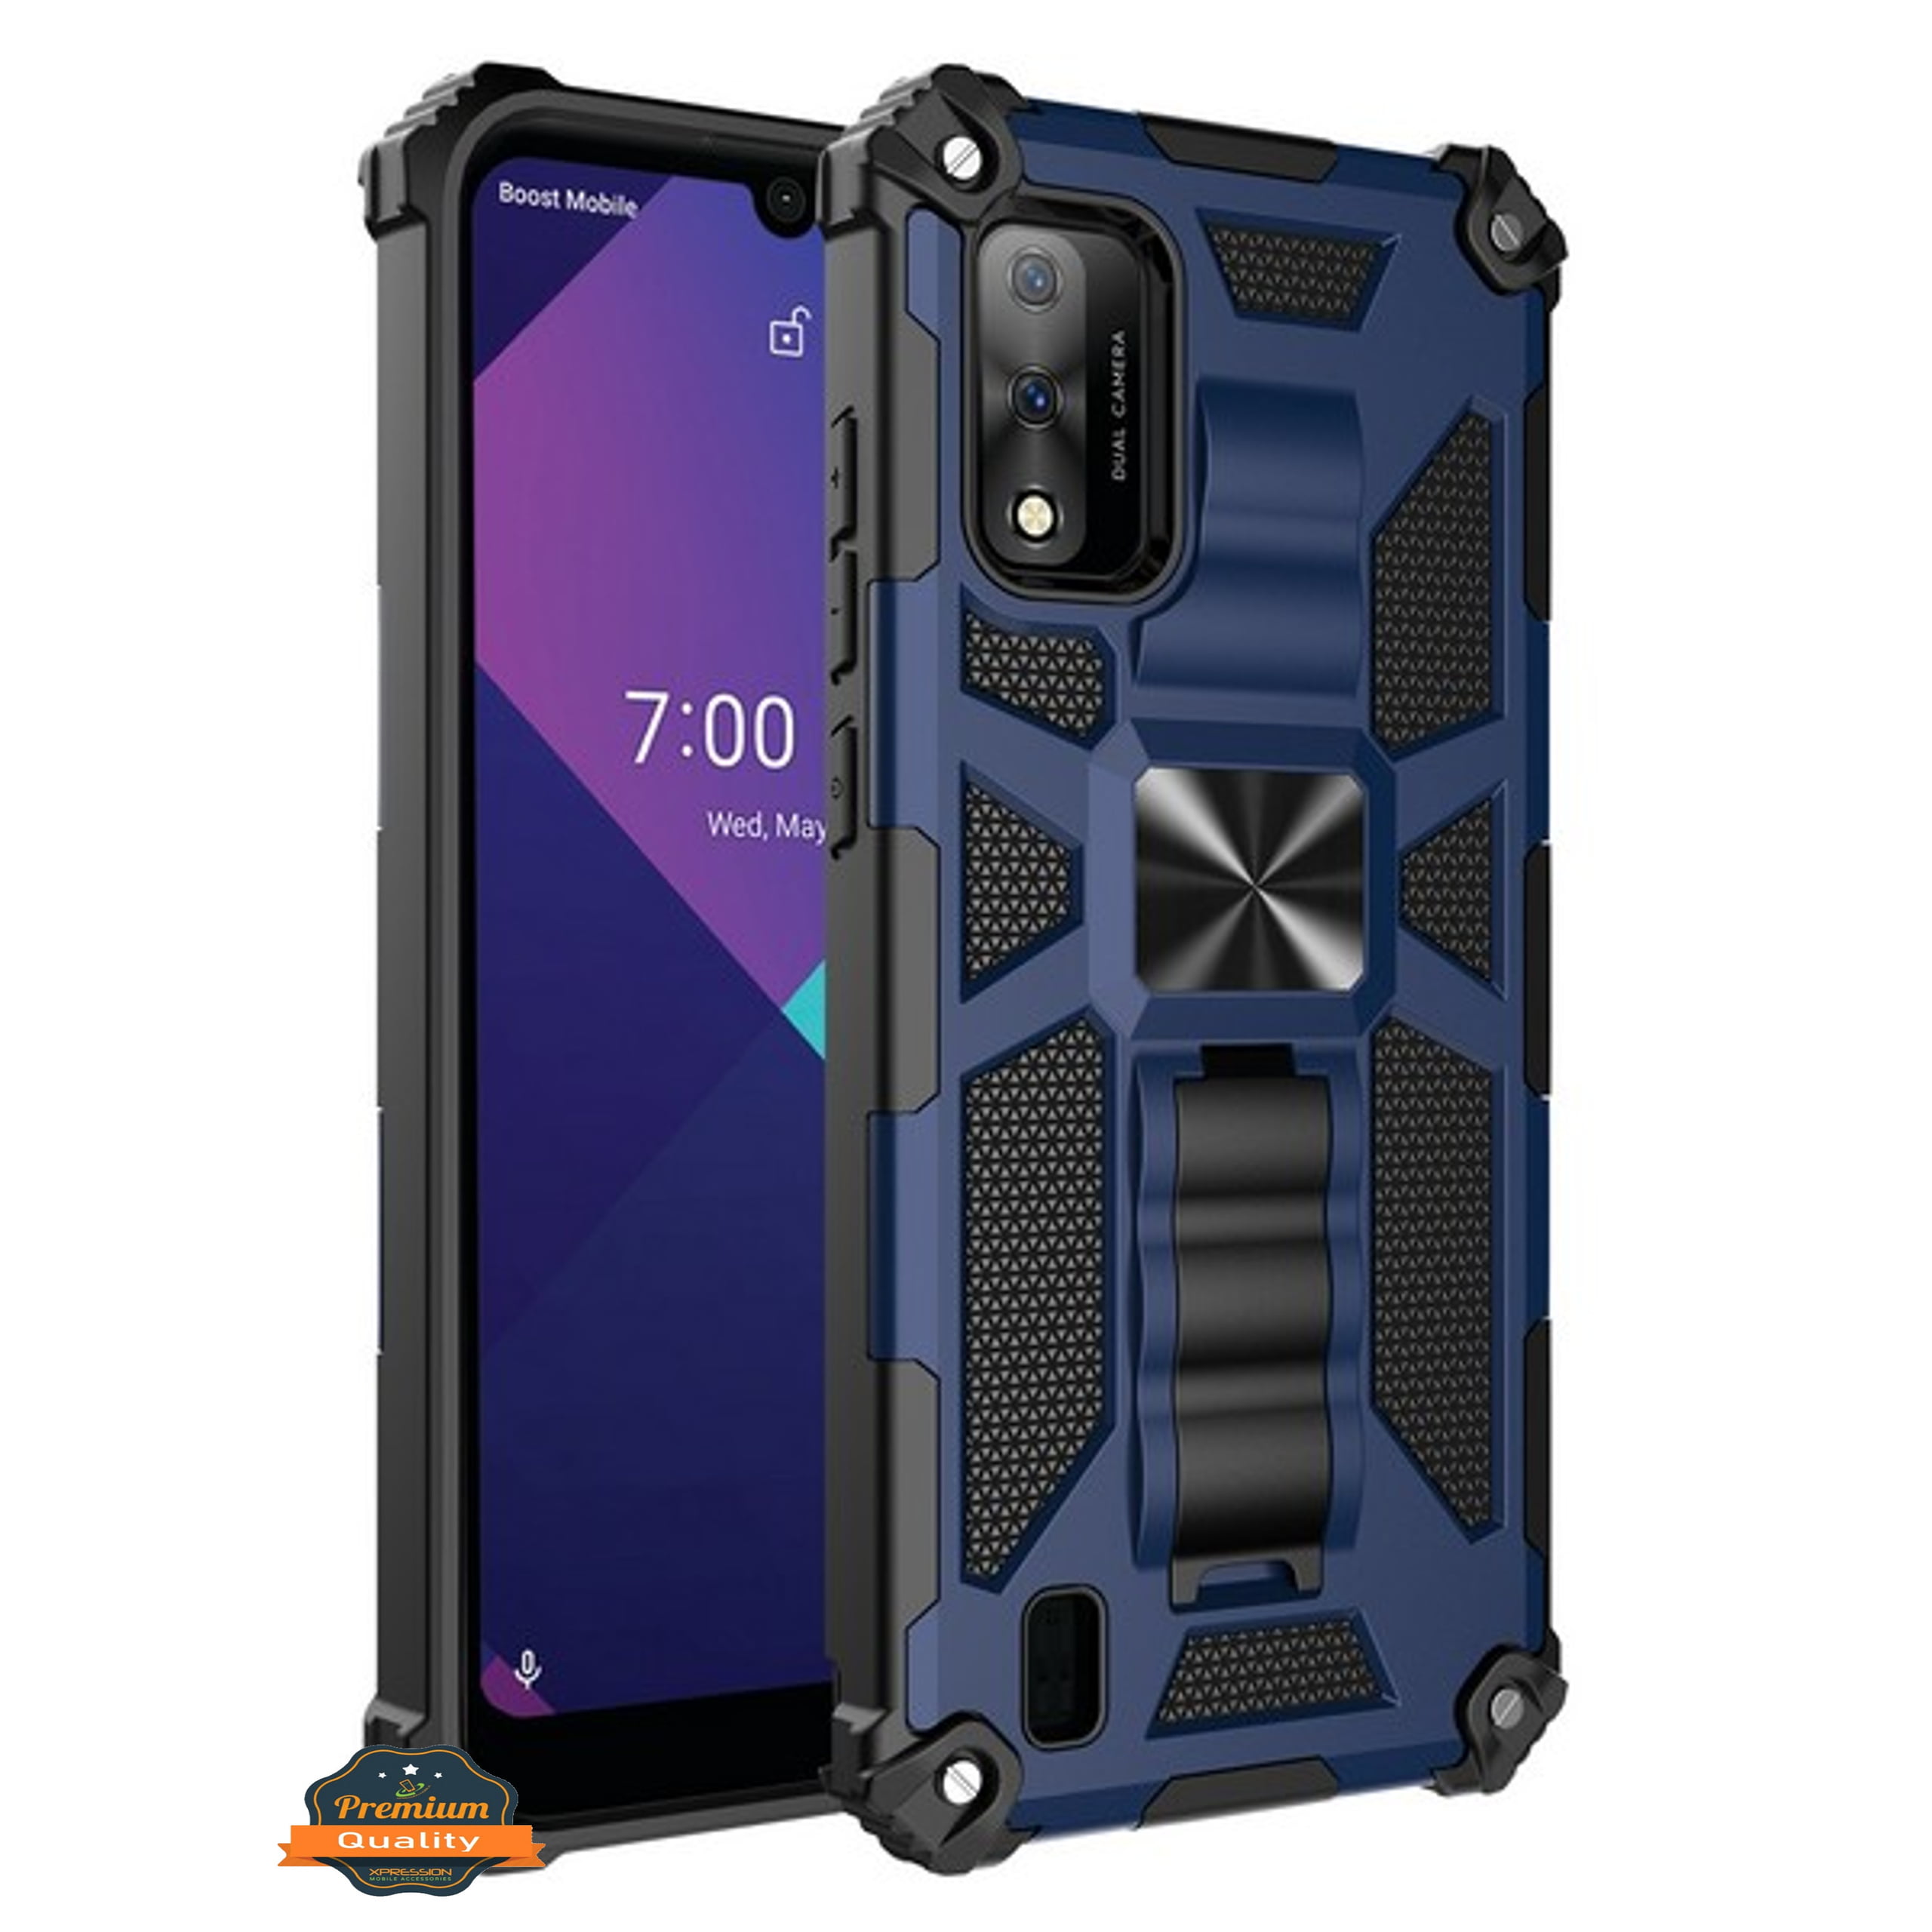 CaseExpert Samsung Galaxy A40 Case, Shockproof Rugged Impact Armor Slim  Hybrid Kickstand Protective Cover Case for Samsung Galaxy A40 Blue